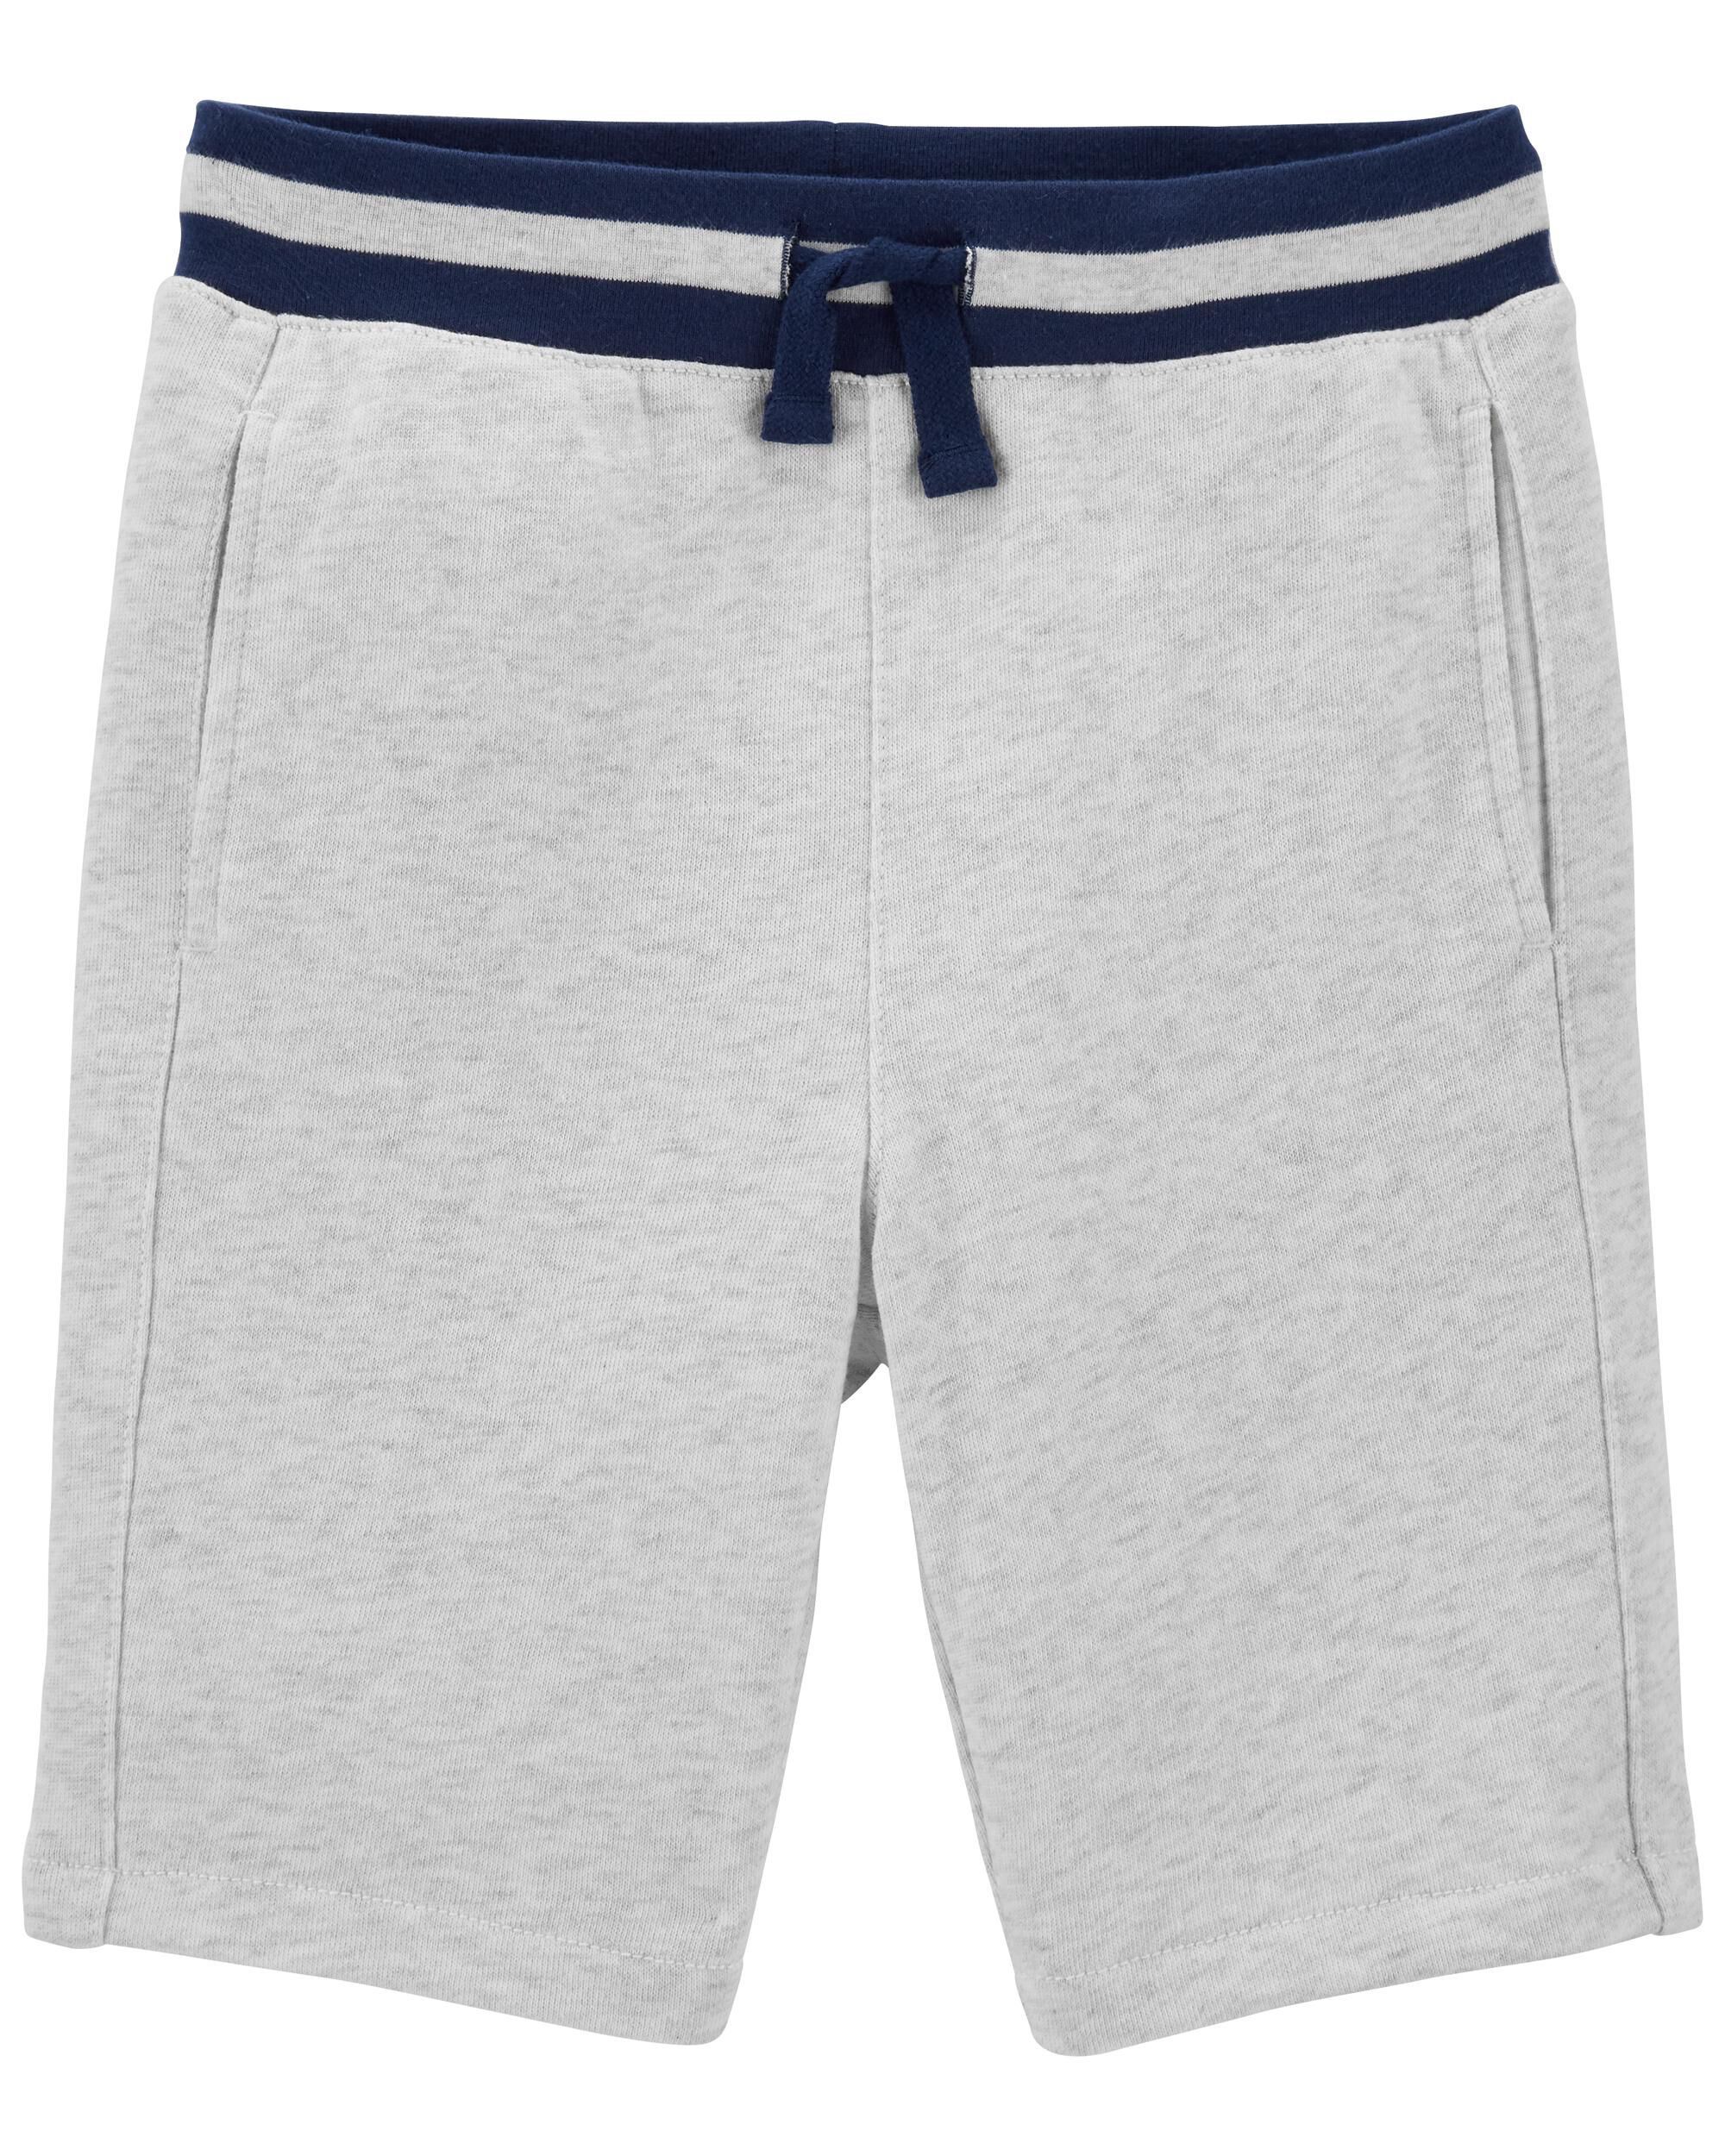 Details about   Carter's Little Boys' Pull-on French Terry Shorts 